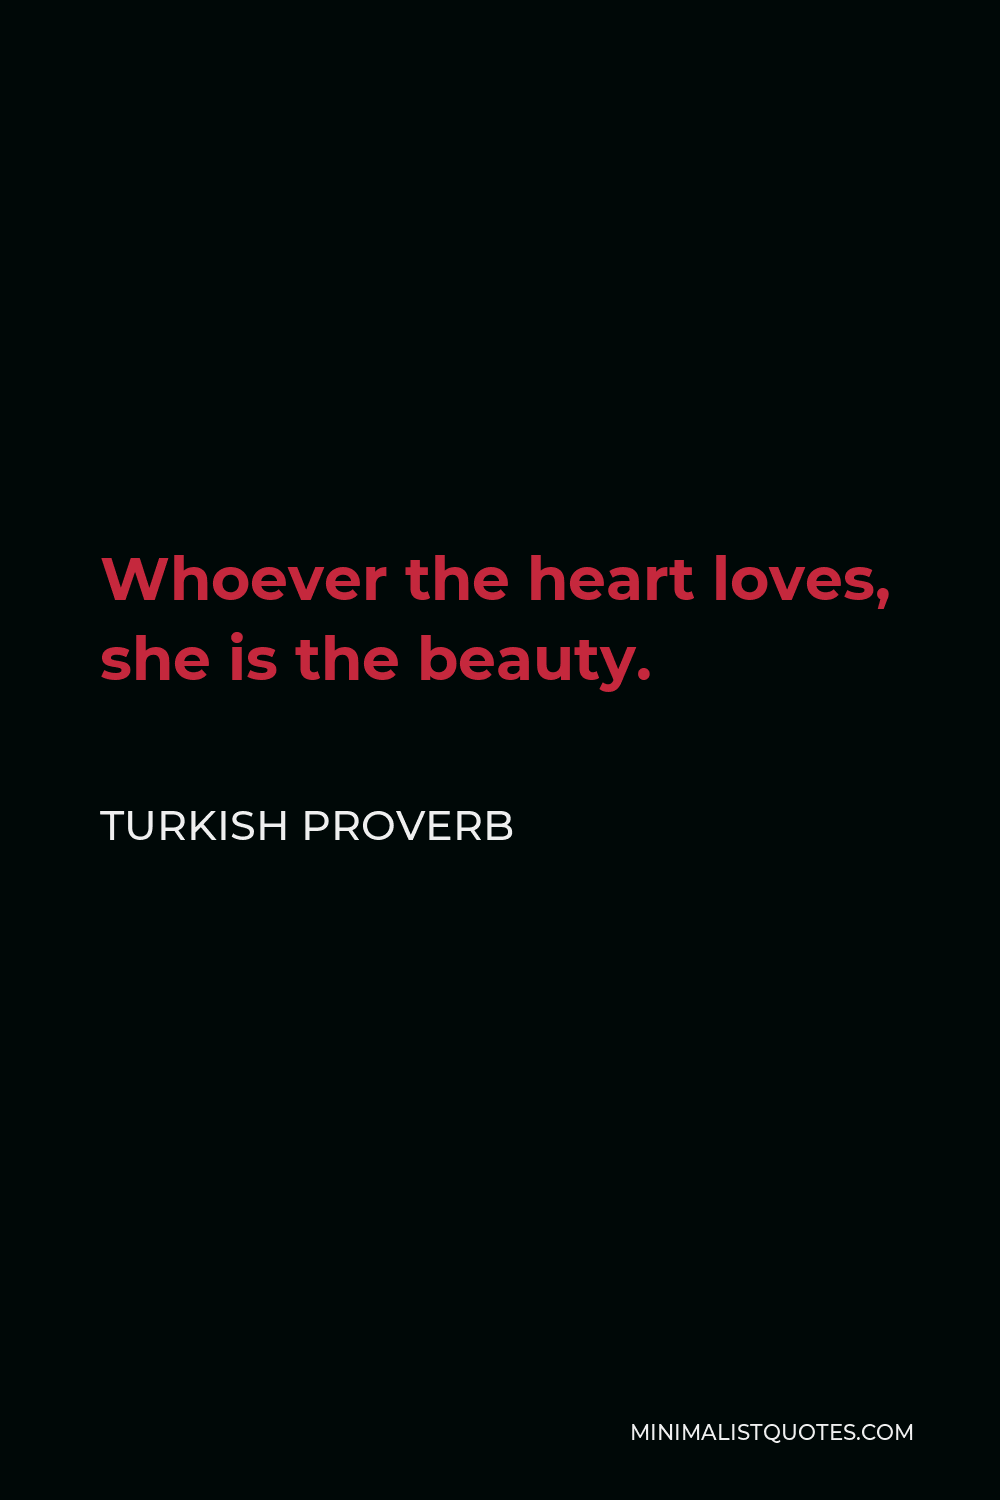 Turkish Proverb Quote - Whoever the heart loves, she is the beauty.